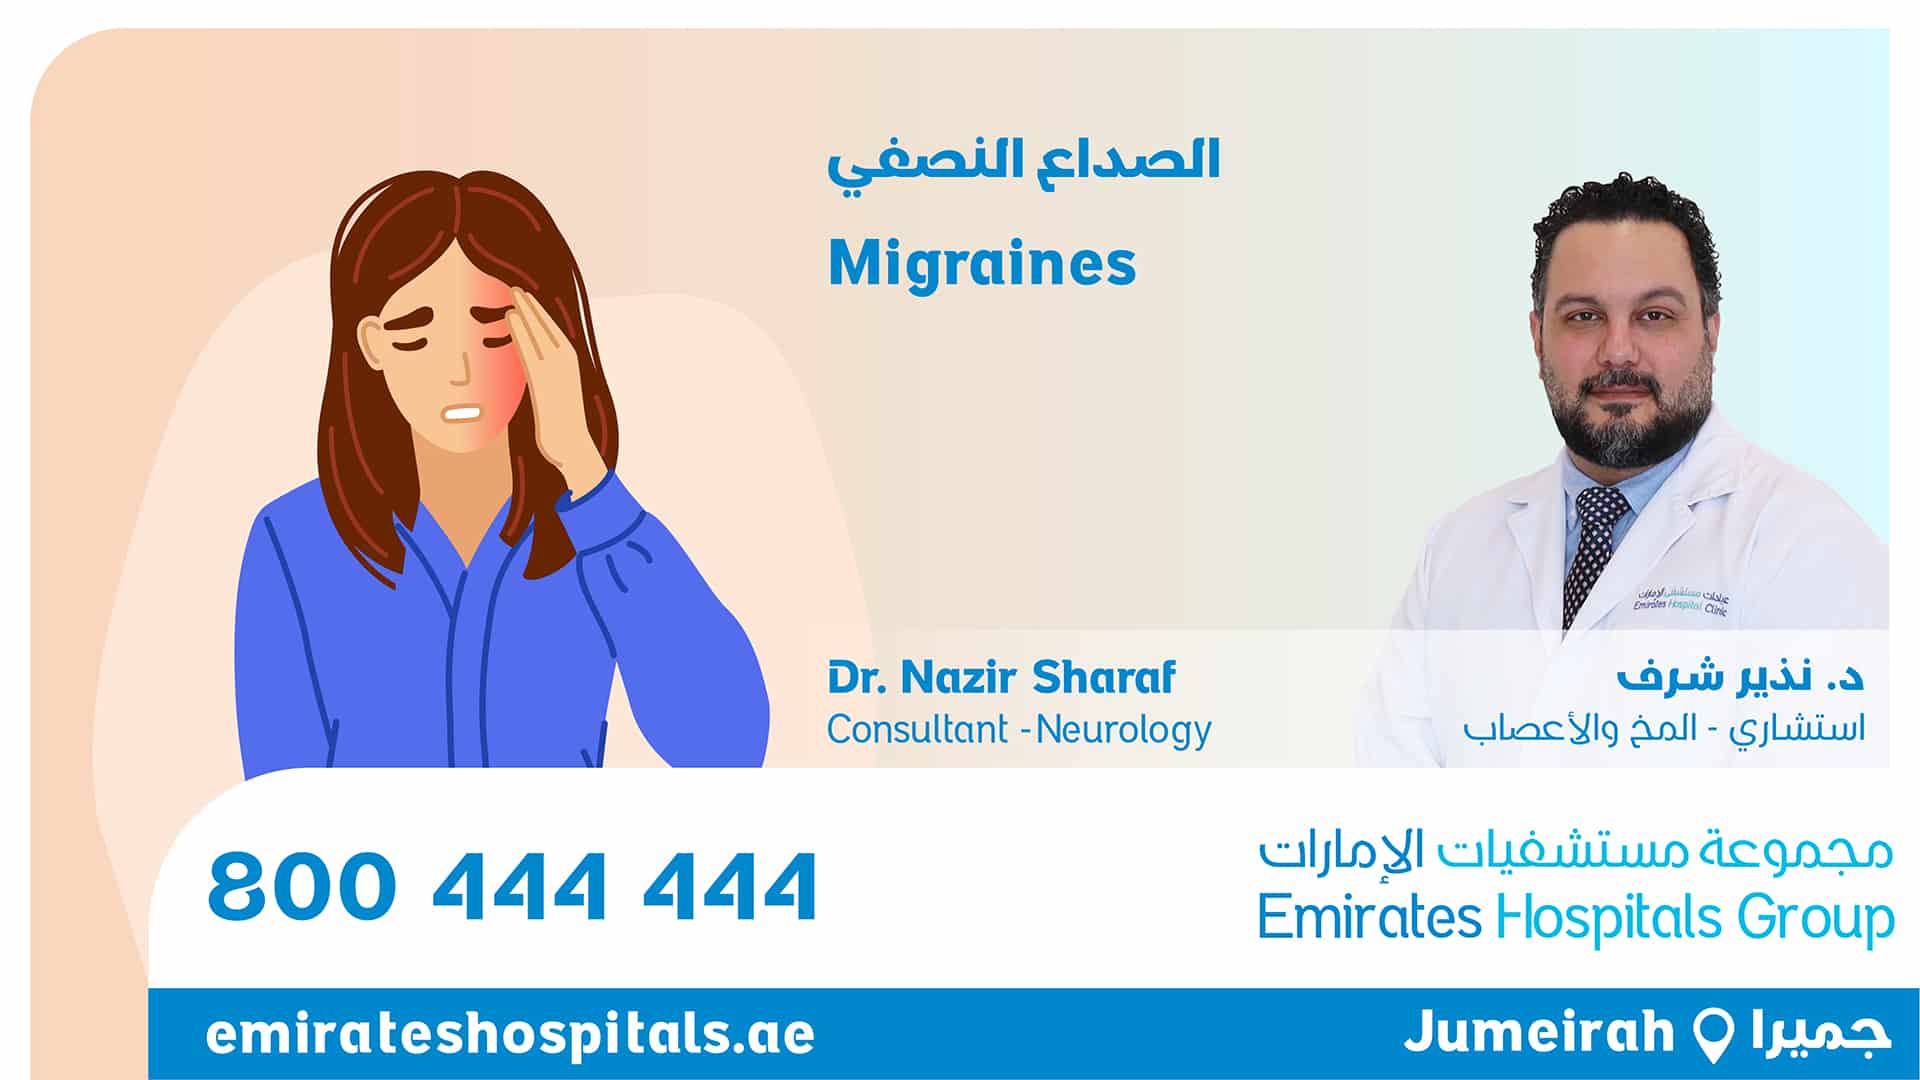 Migraines - Dr. Nazir Sharaf Consultant Neurology